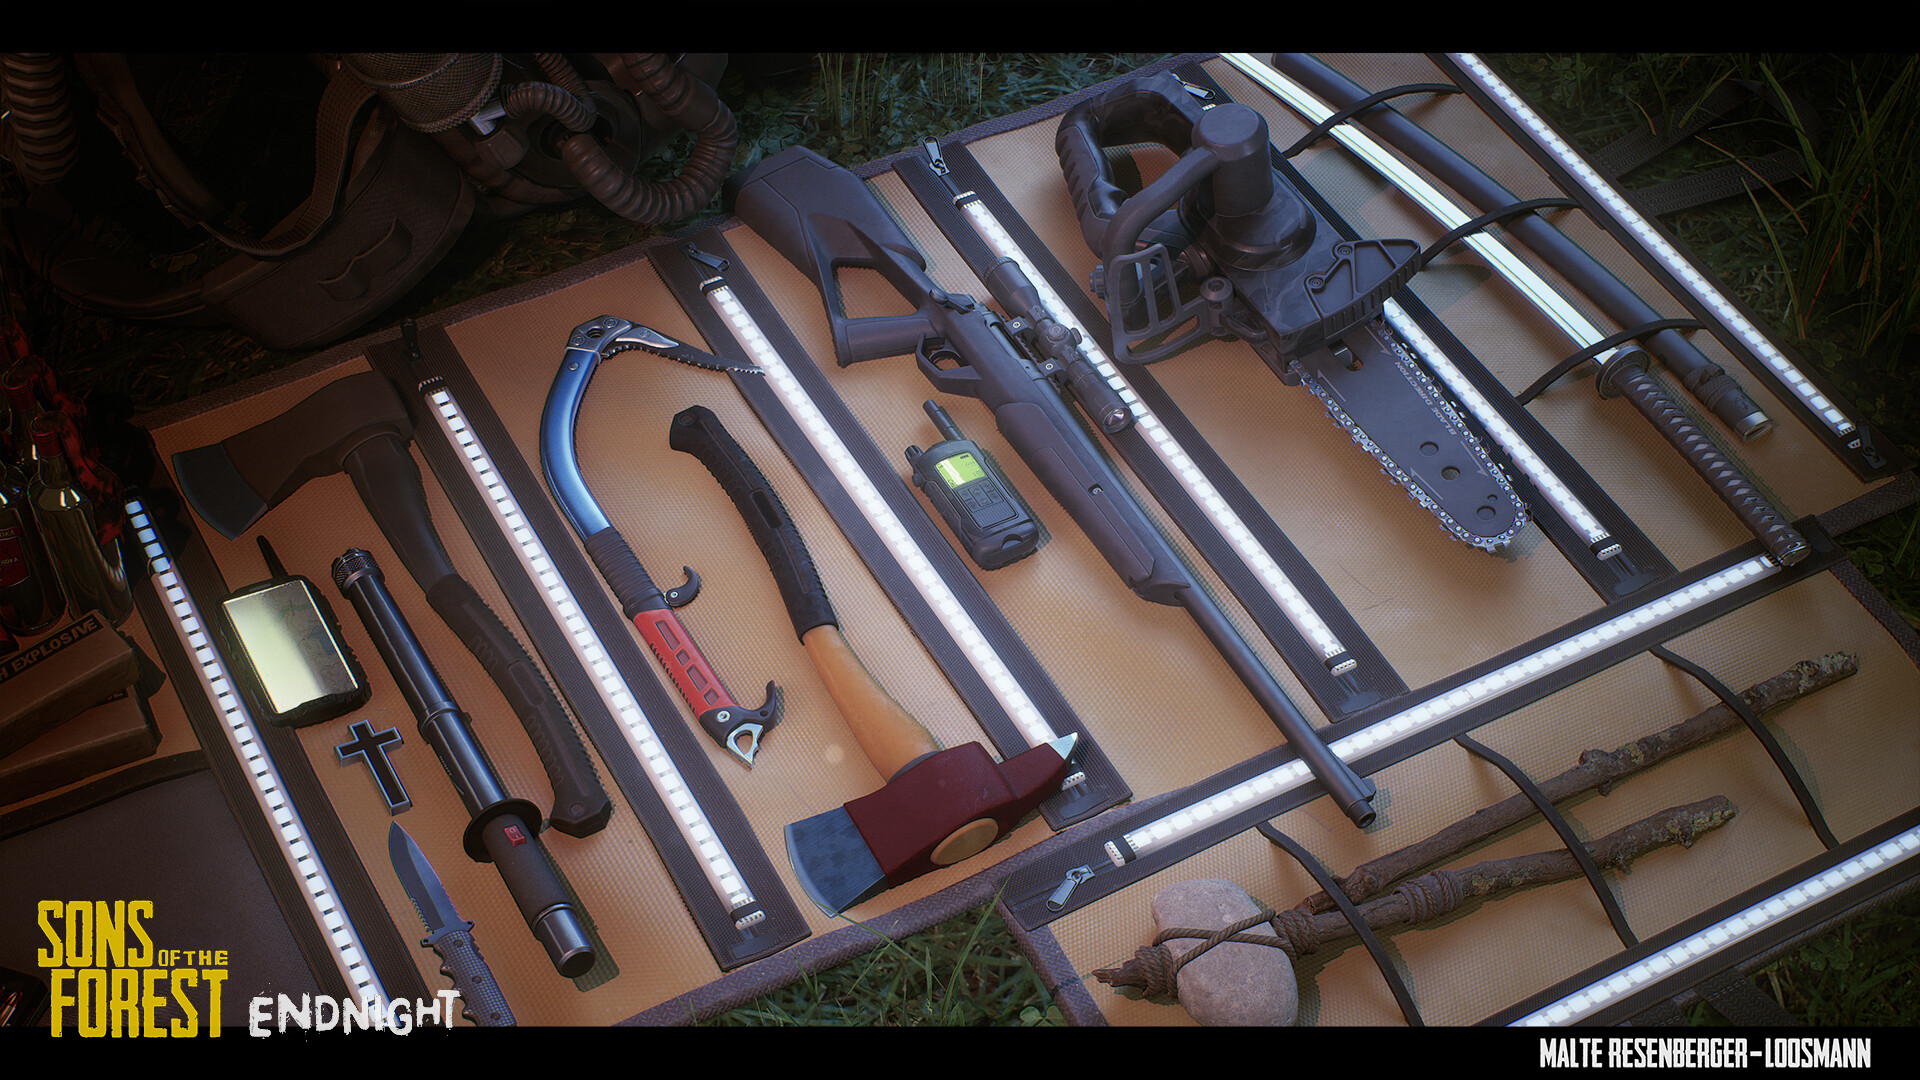 ArtStation - Endnight - Sons Of The Forest - Inventory / Crafting